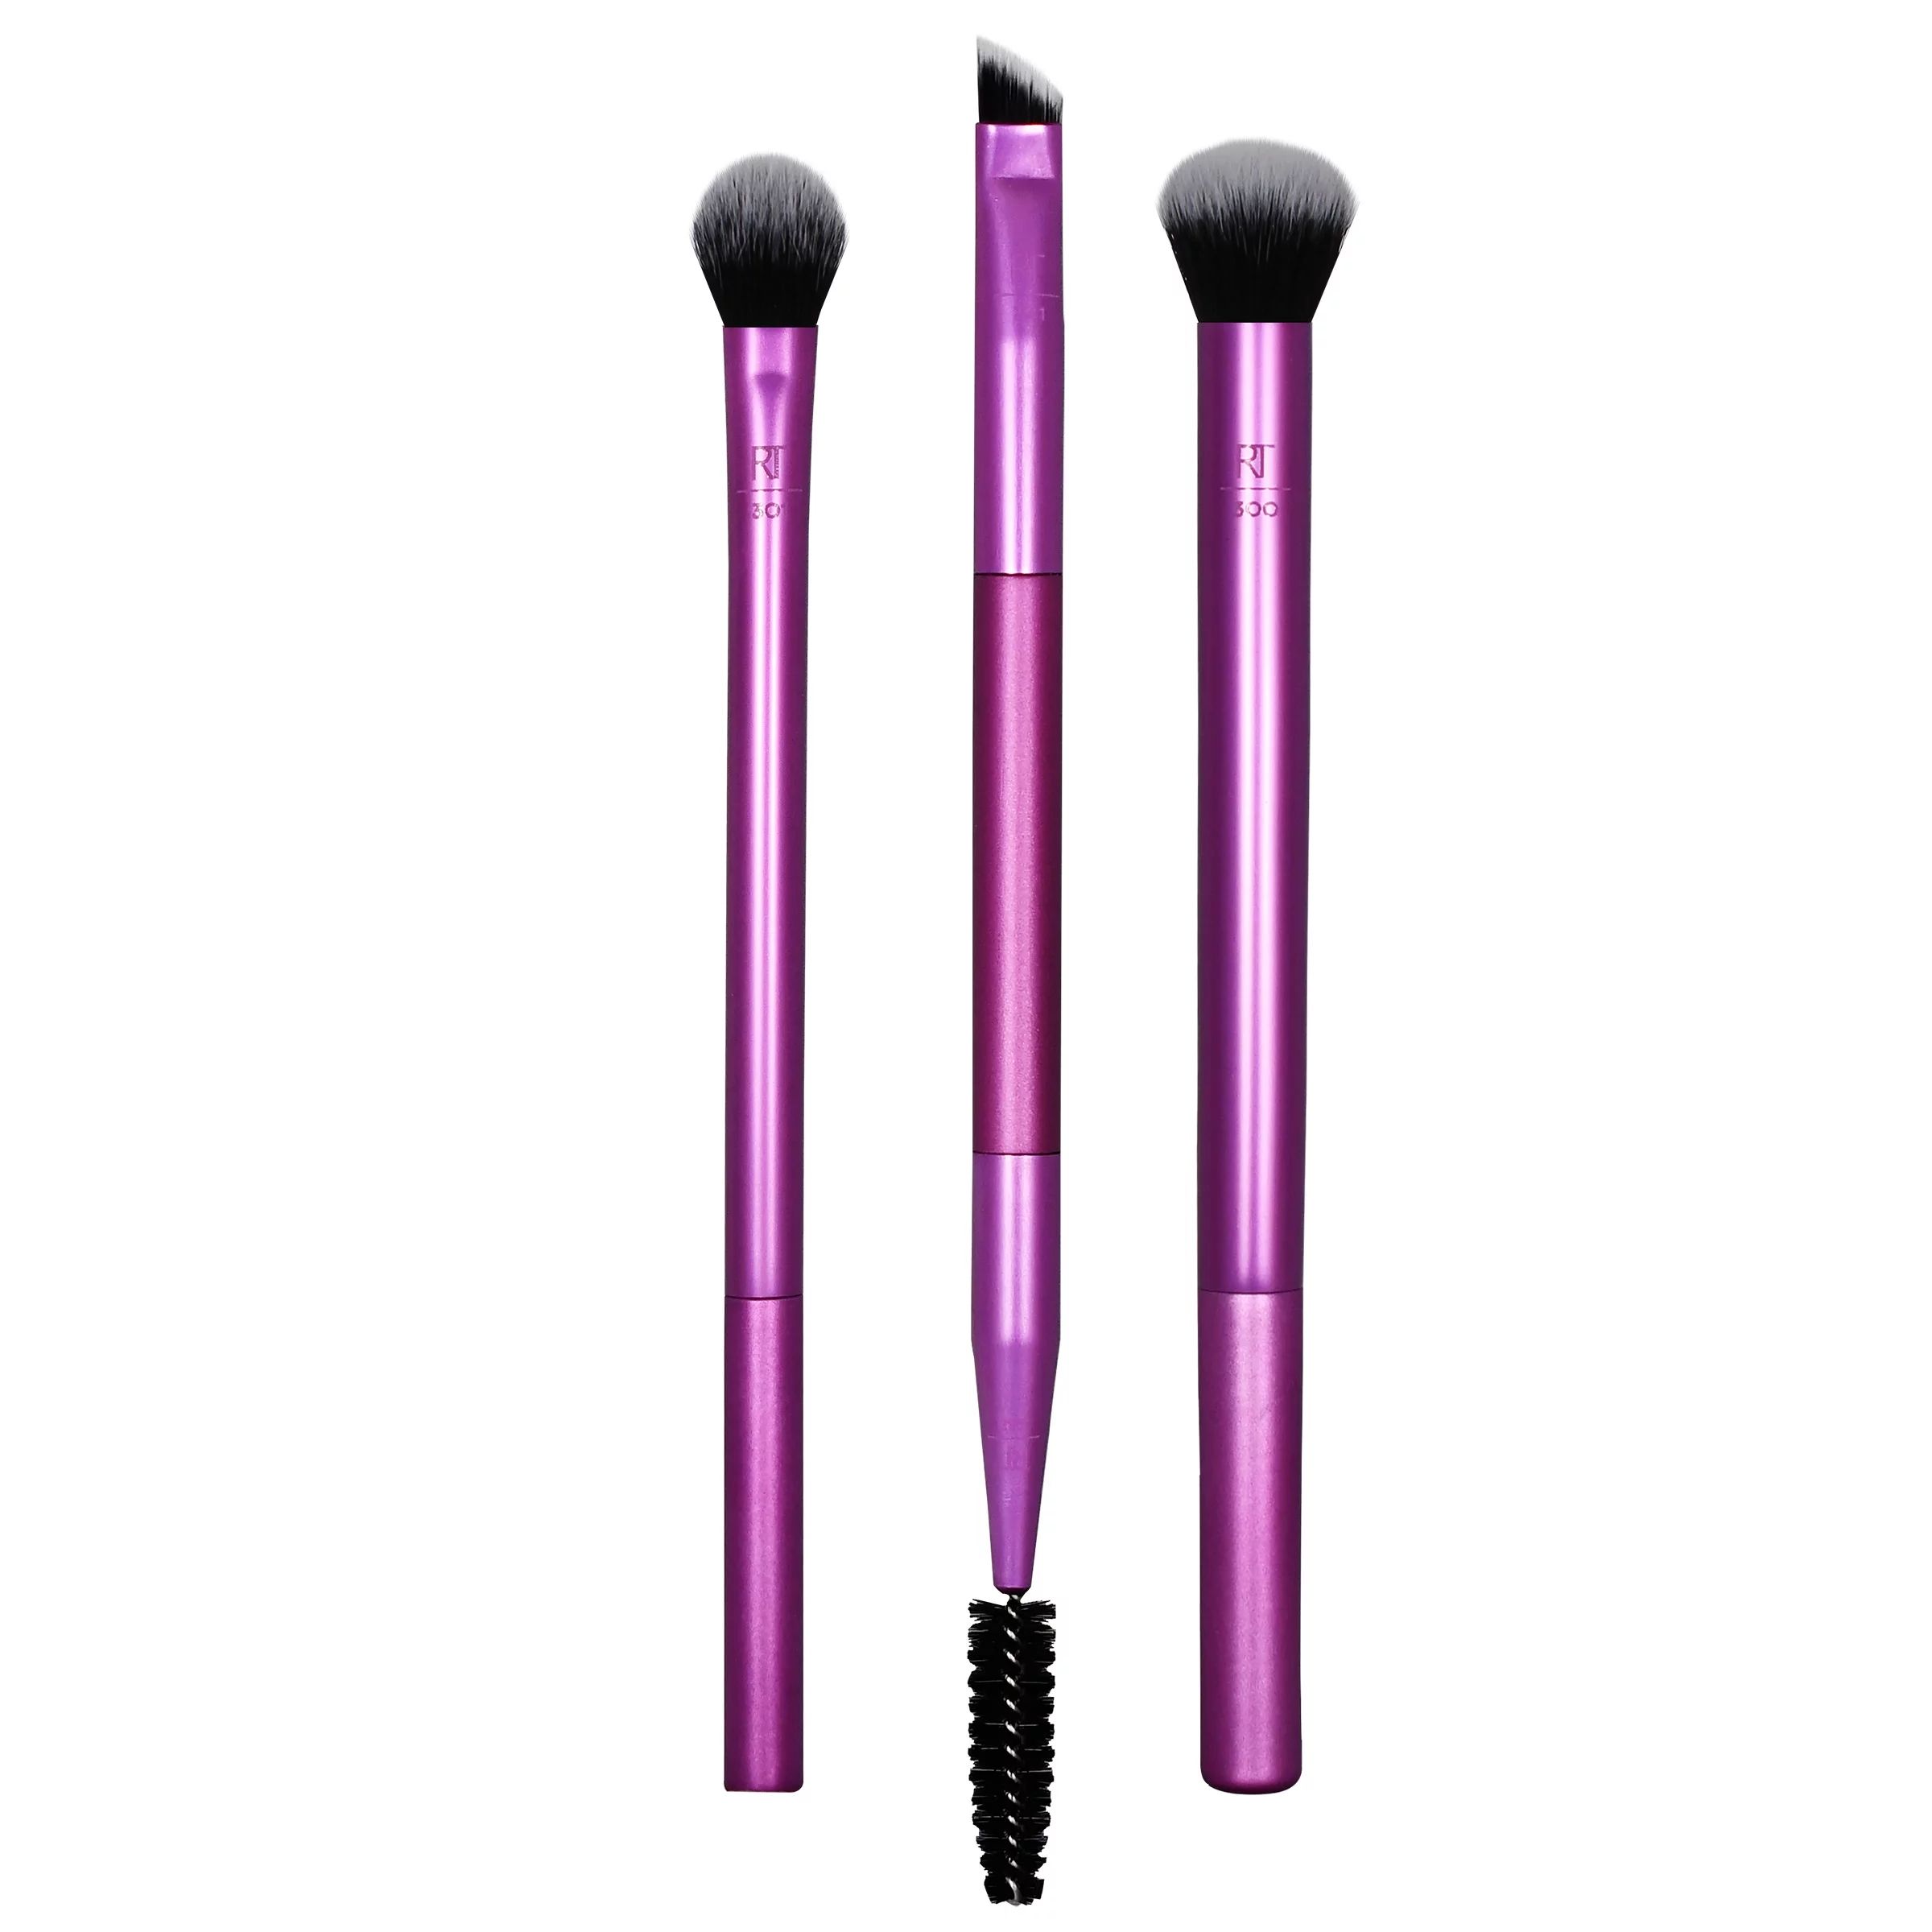 Real Techniques Eye Shade & Blend Makeup Brush Trio, For Layering Powder Shadows Evenly, Shaping ... | Walmart (US)